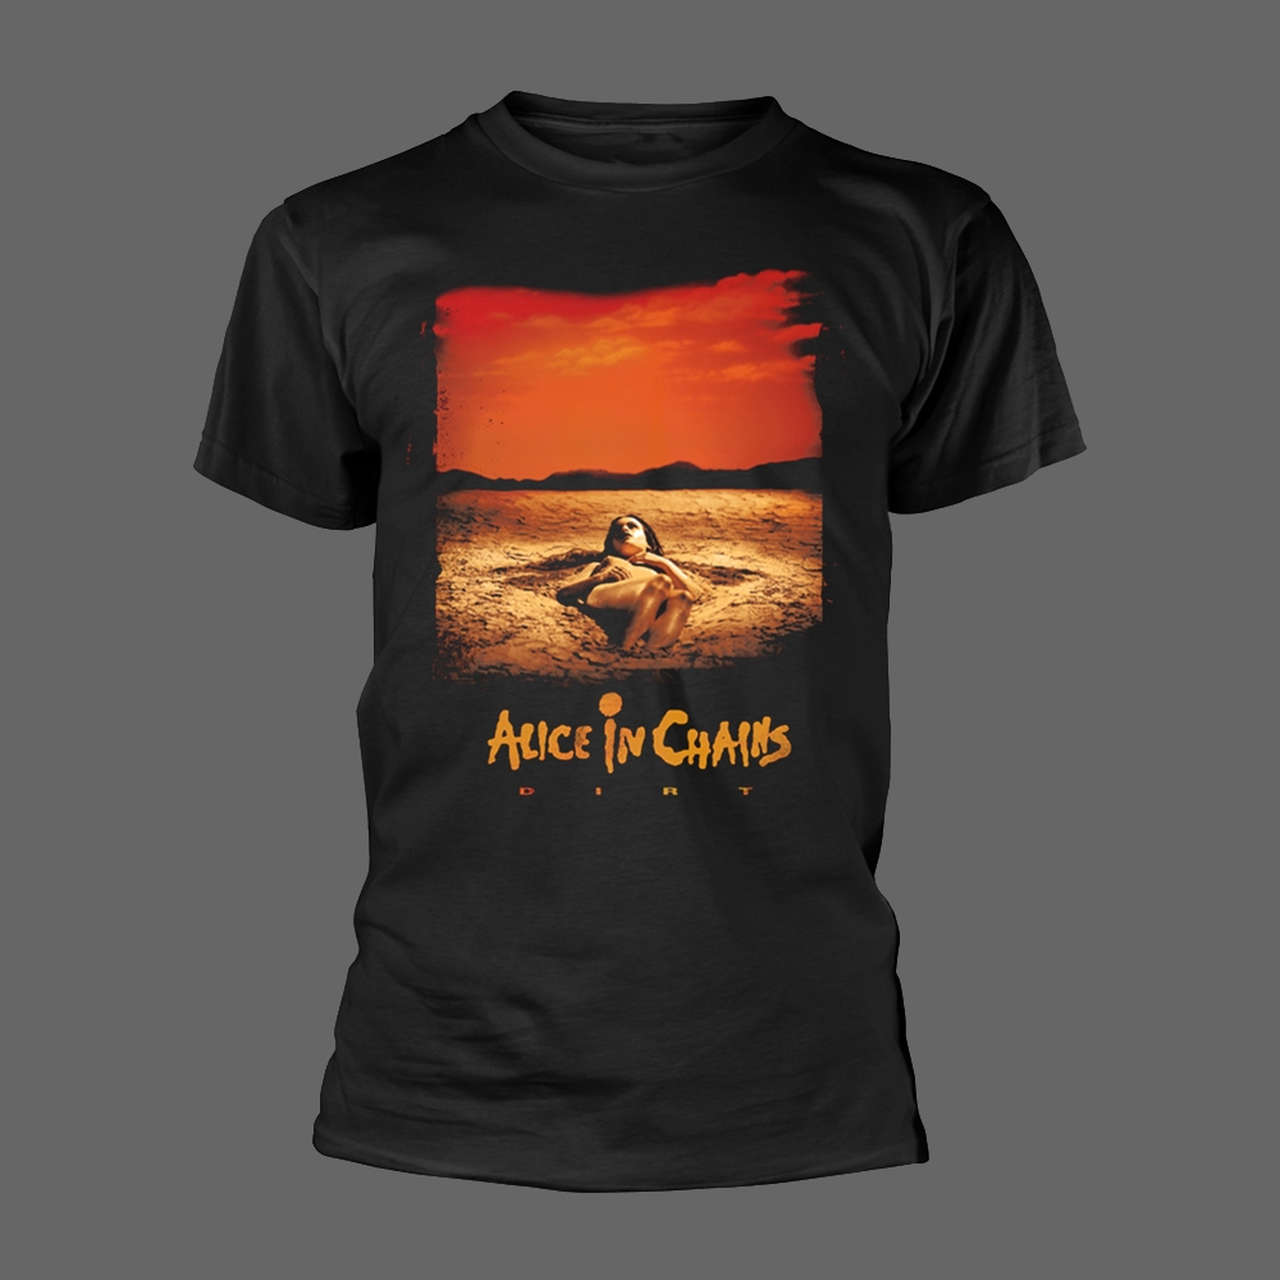 Alice in Chains - Dirt (Black) (T-Shirt)